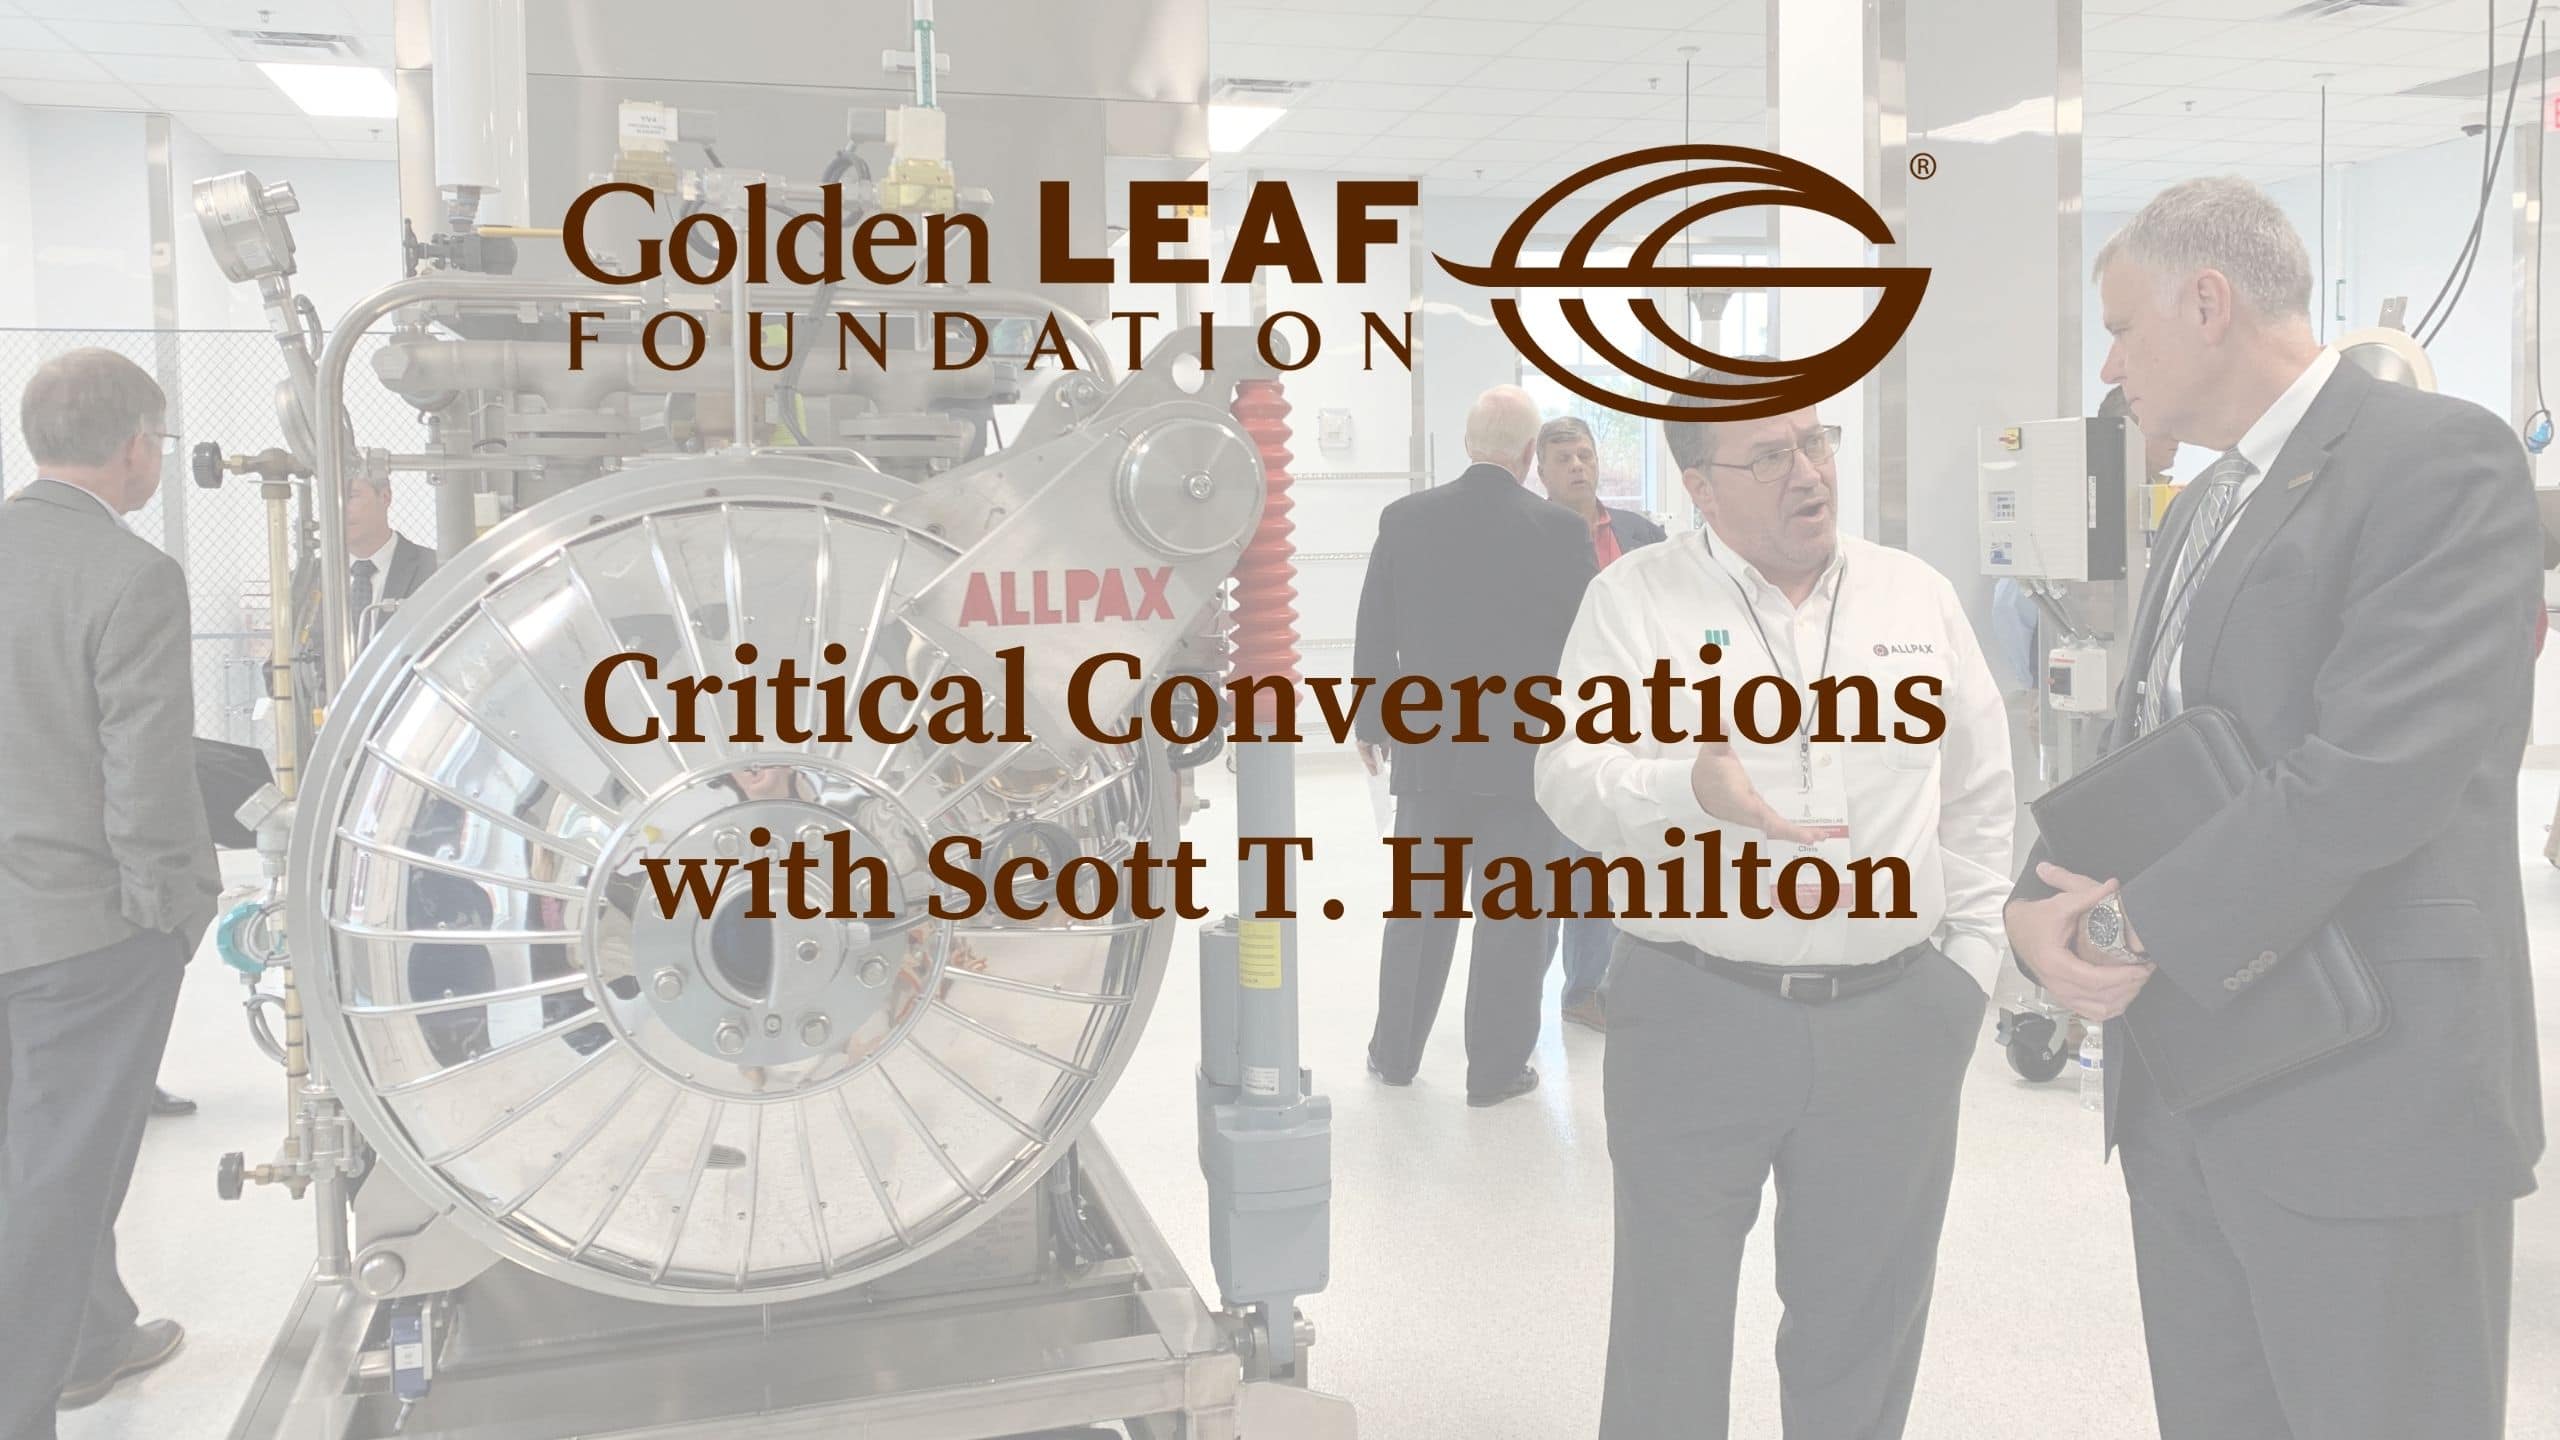 Critical Conversations with Scott T. Hamilton featuring Tom Barkin, President and Chief Executive Officer of the Federal Reserve Bank of Richmond